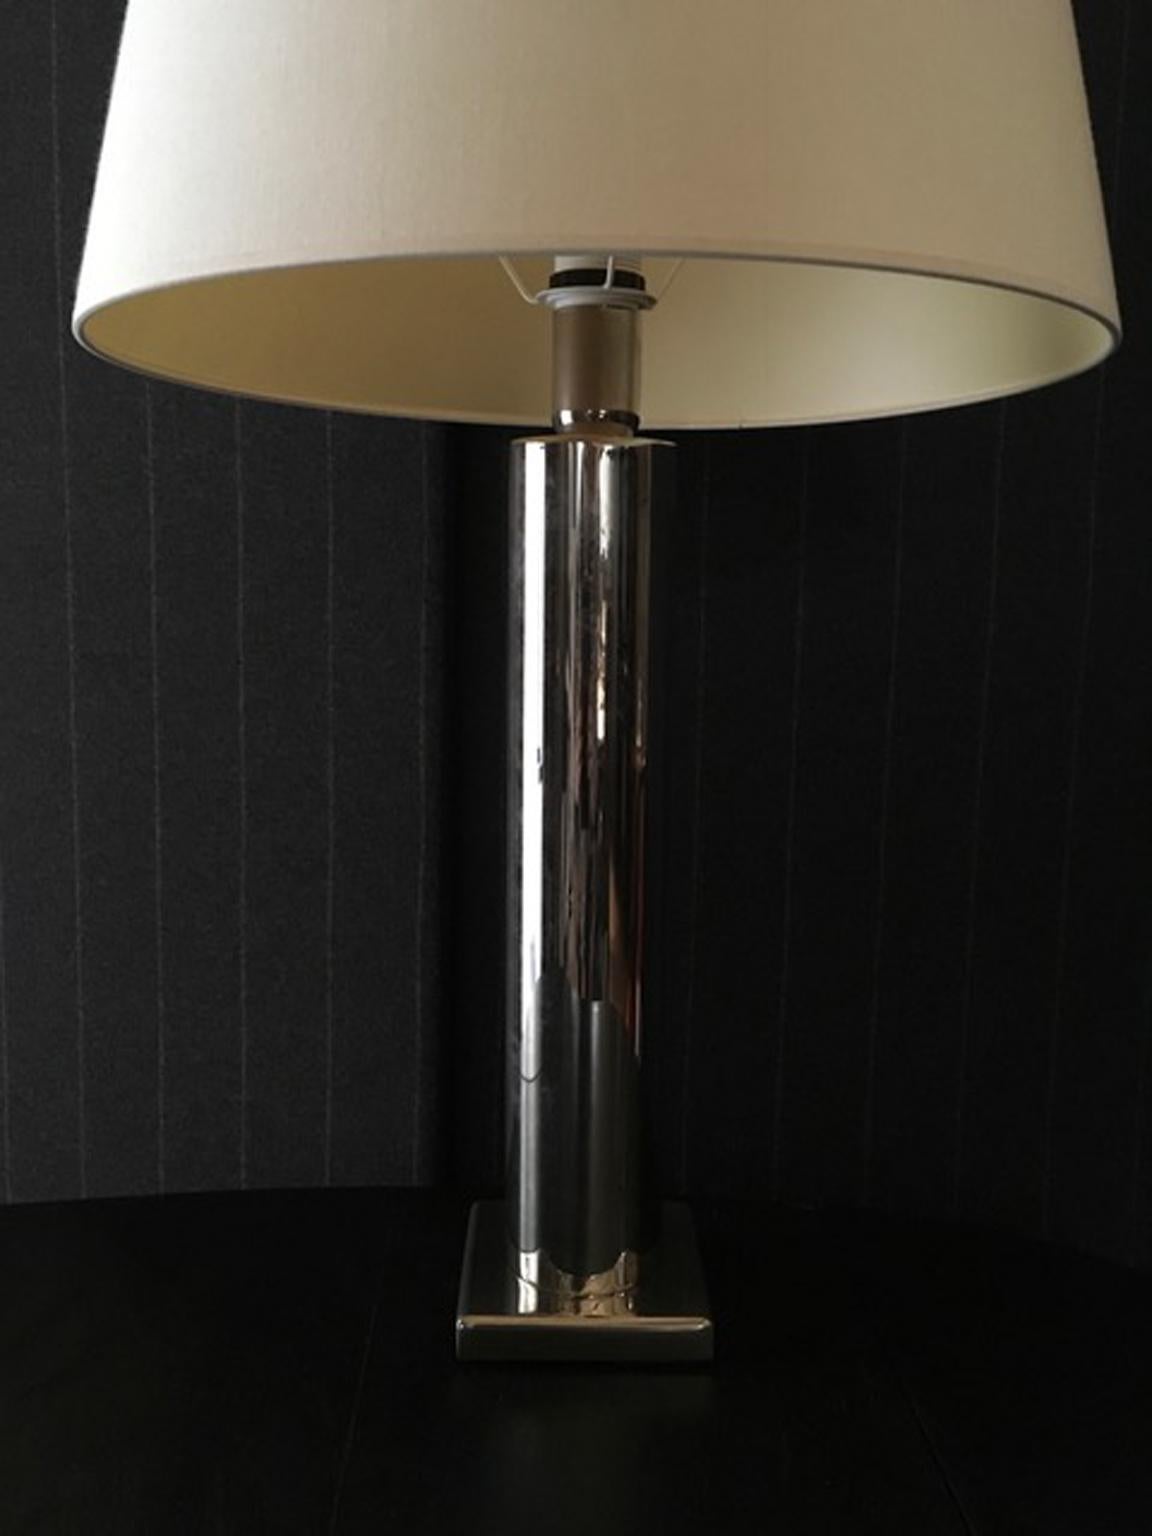 Contemporary metal chrome made in Italy, vintage and Minimalist style table lamp

This geometric and linear shape table lamp in a Minimalist style, is a contemporary Italian production, made with the finishing surface used effect. The elegant and